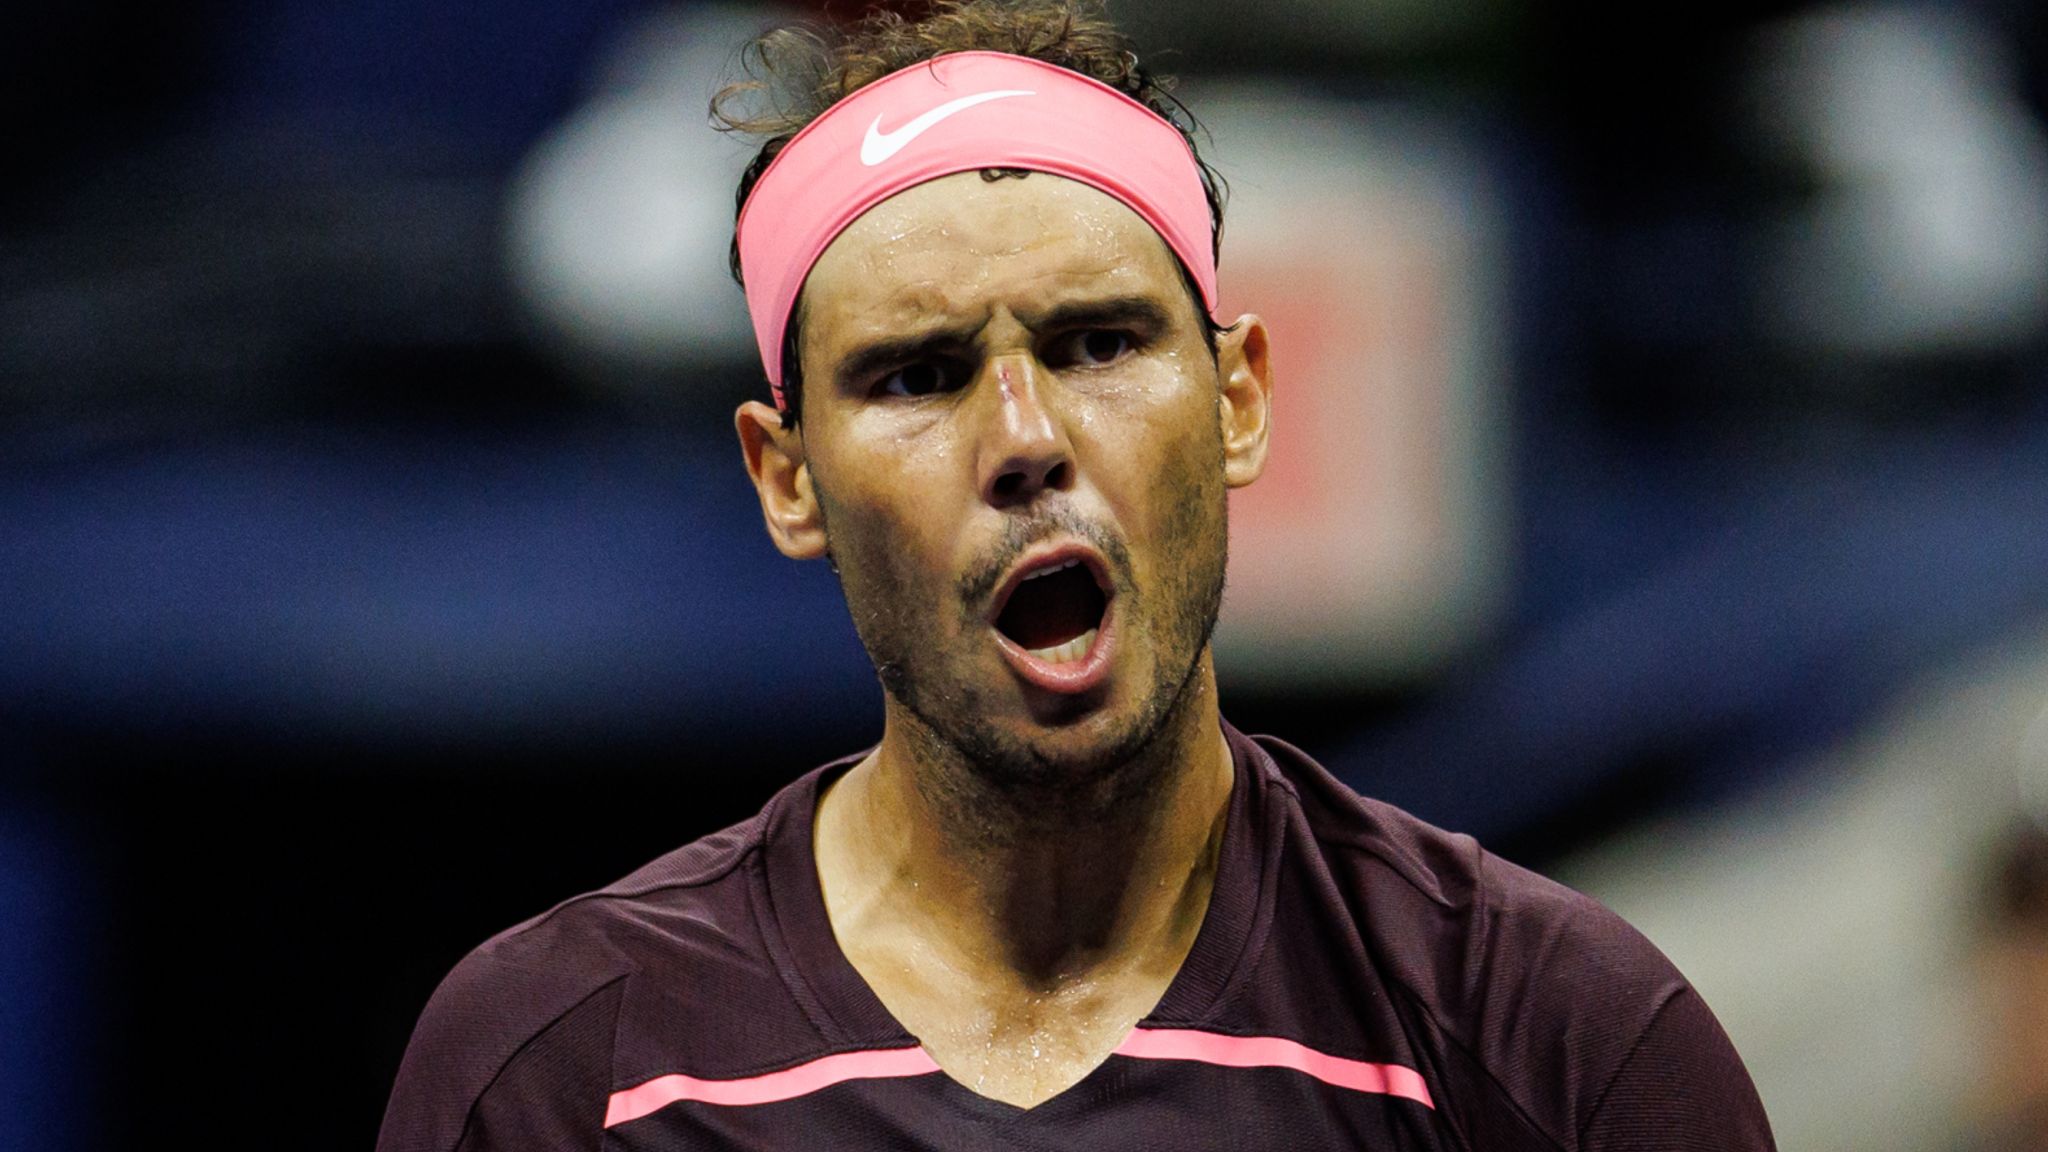 US Open Rafael Nadal breezes into fourth round; Andrey Rublev survives five-set epic, plays Cameron Norrie next Tennis News Sky Sports